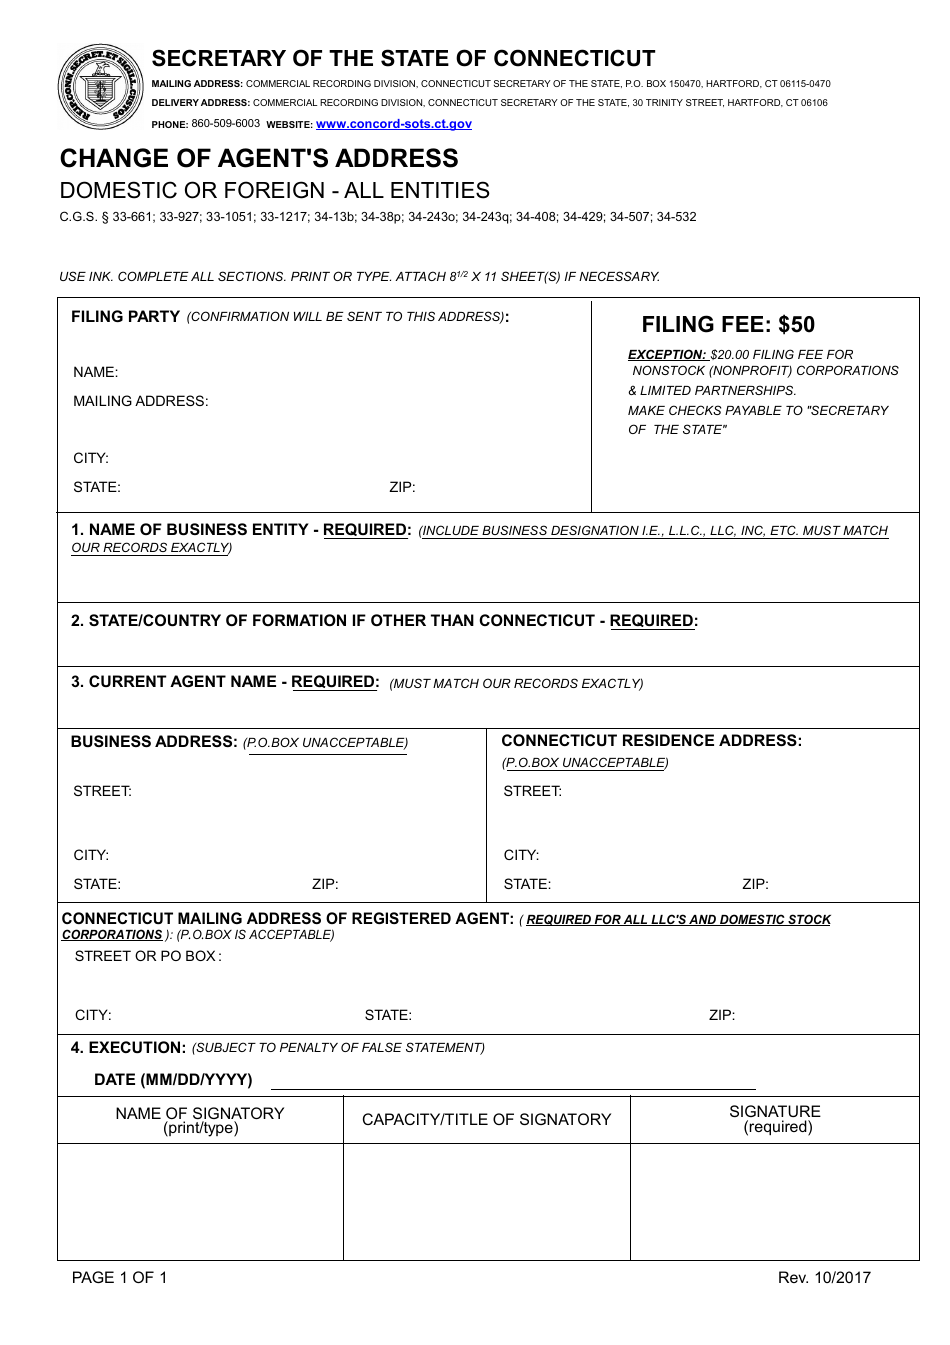 Change of Agents Address - Domestic or Foreign - All Entities - Connecticut, Page 1